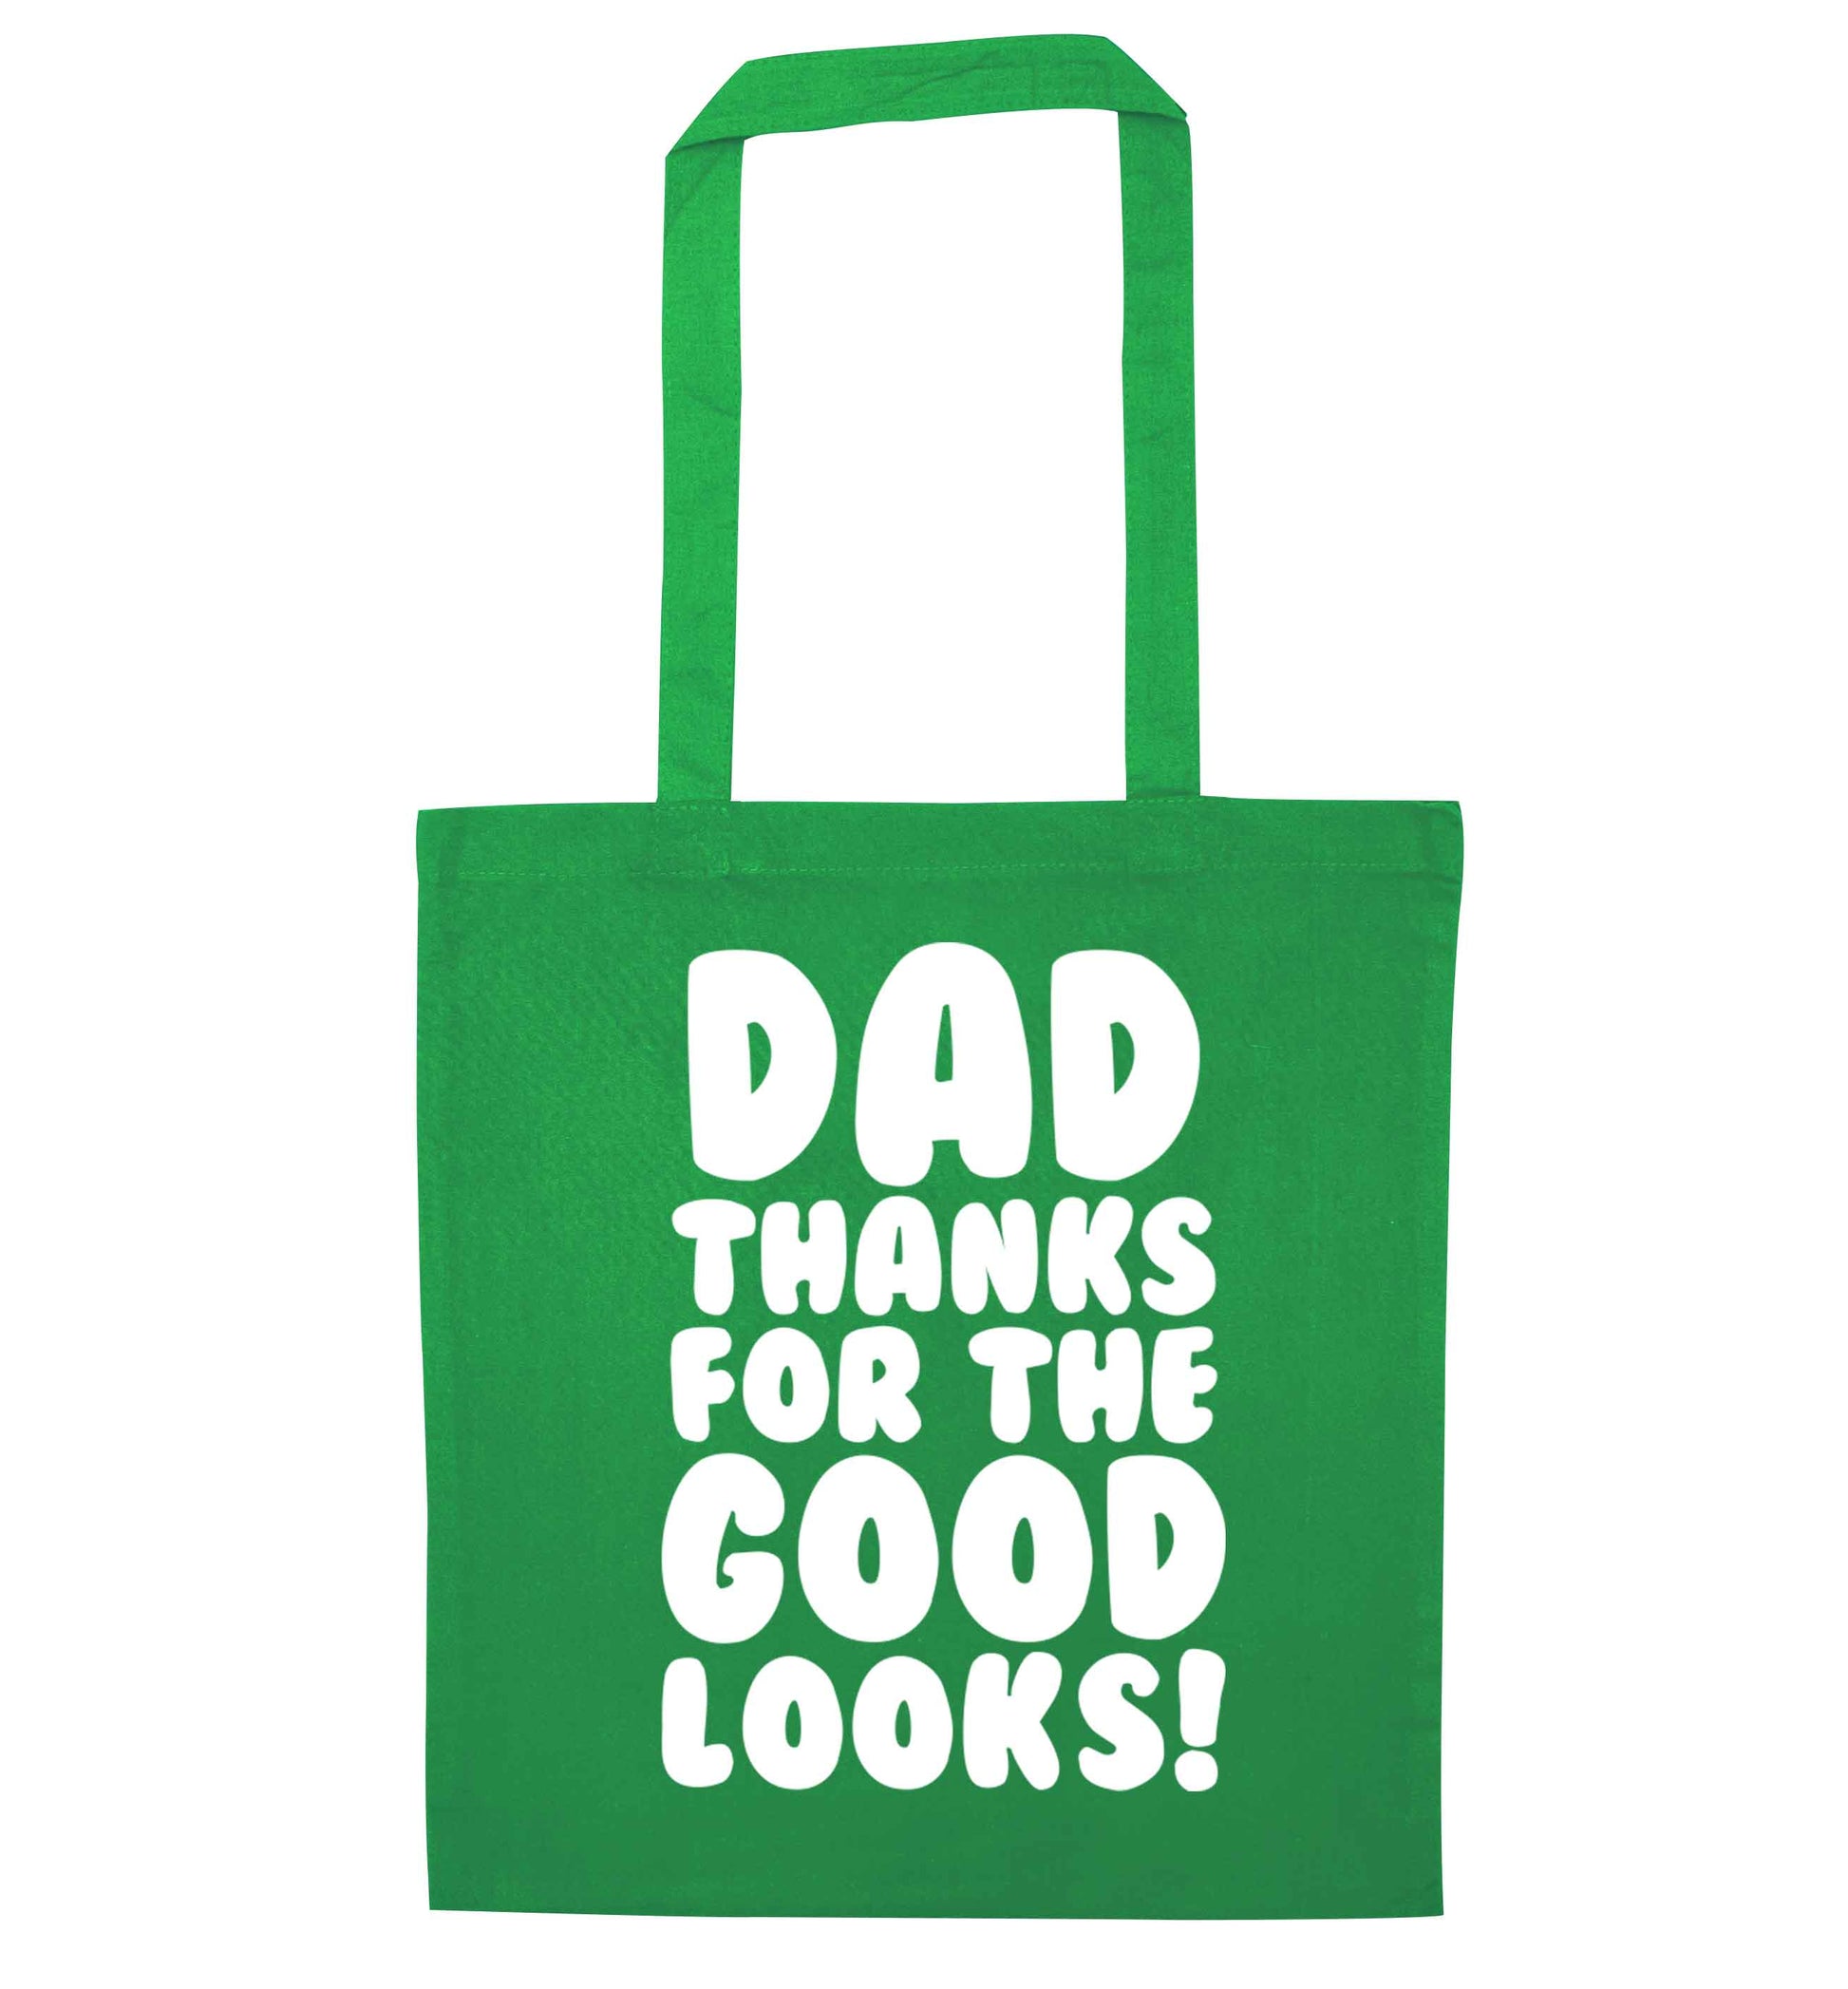 Dad thanks for the good looks green tote bag